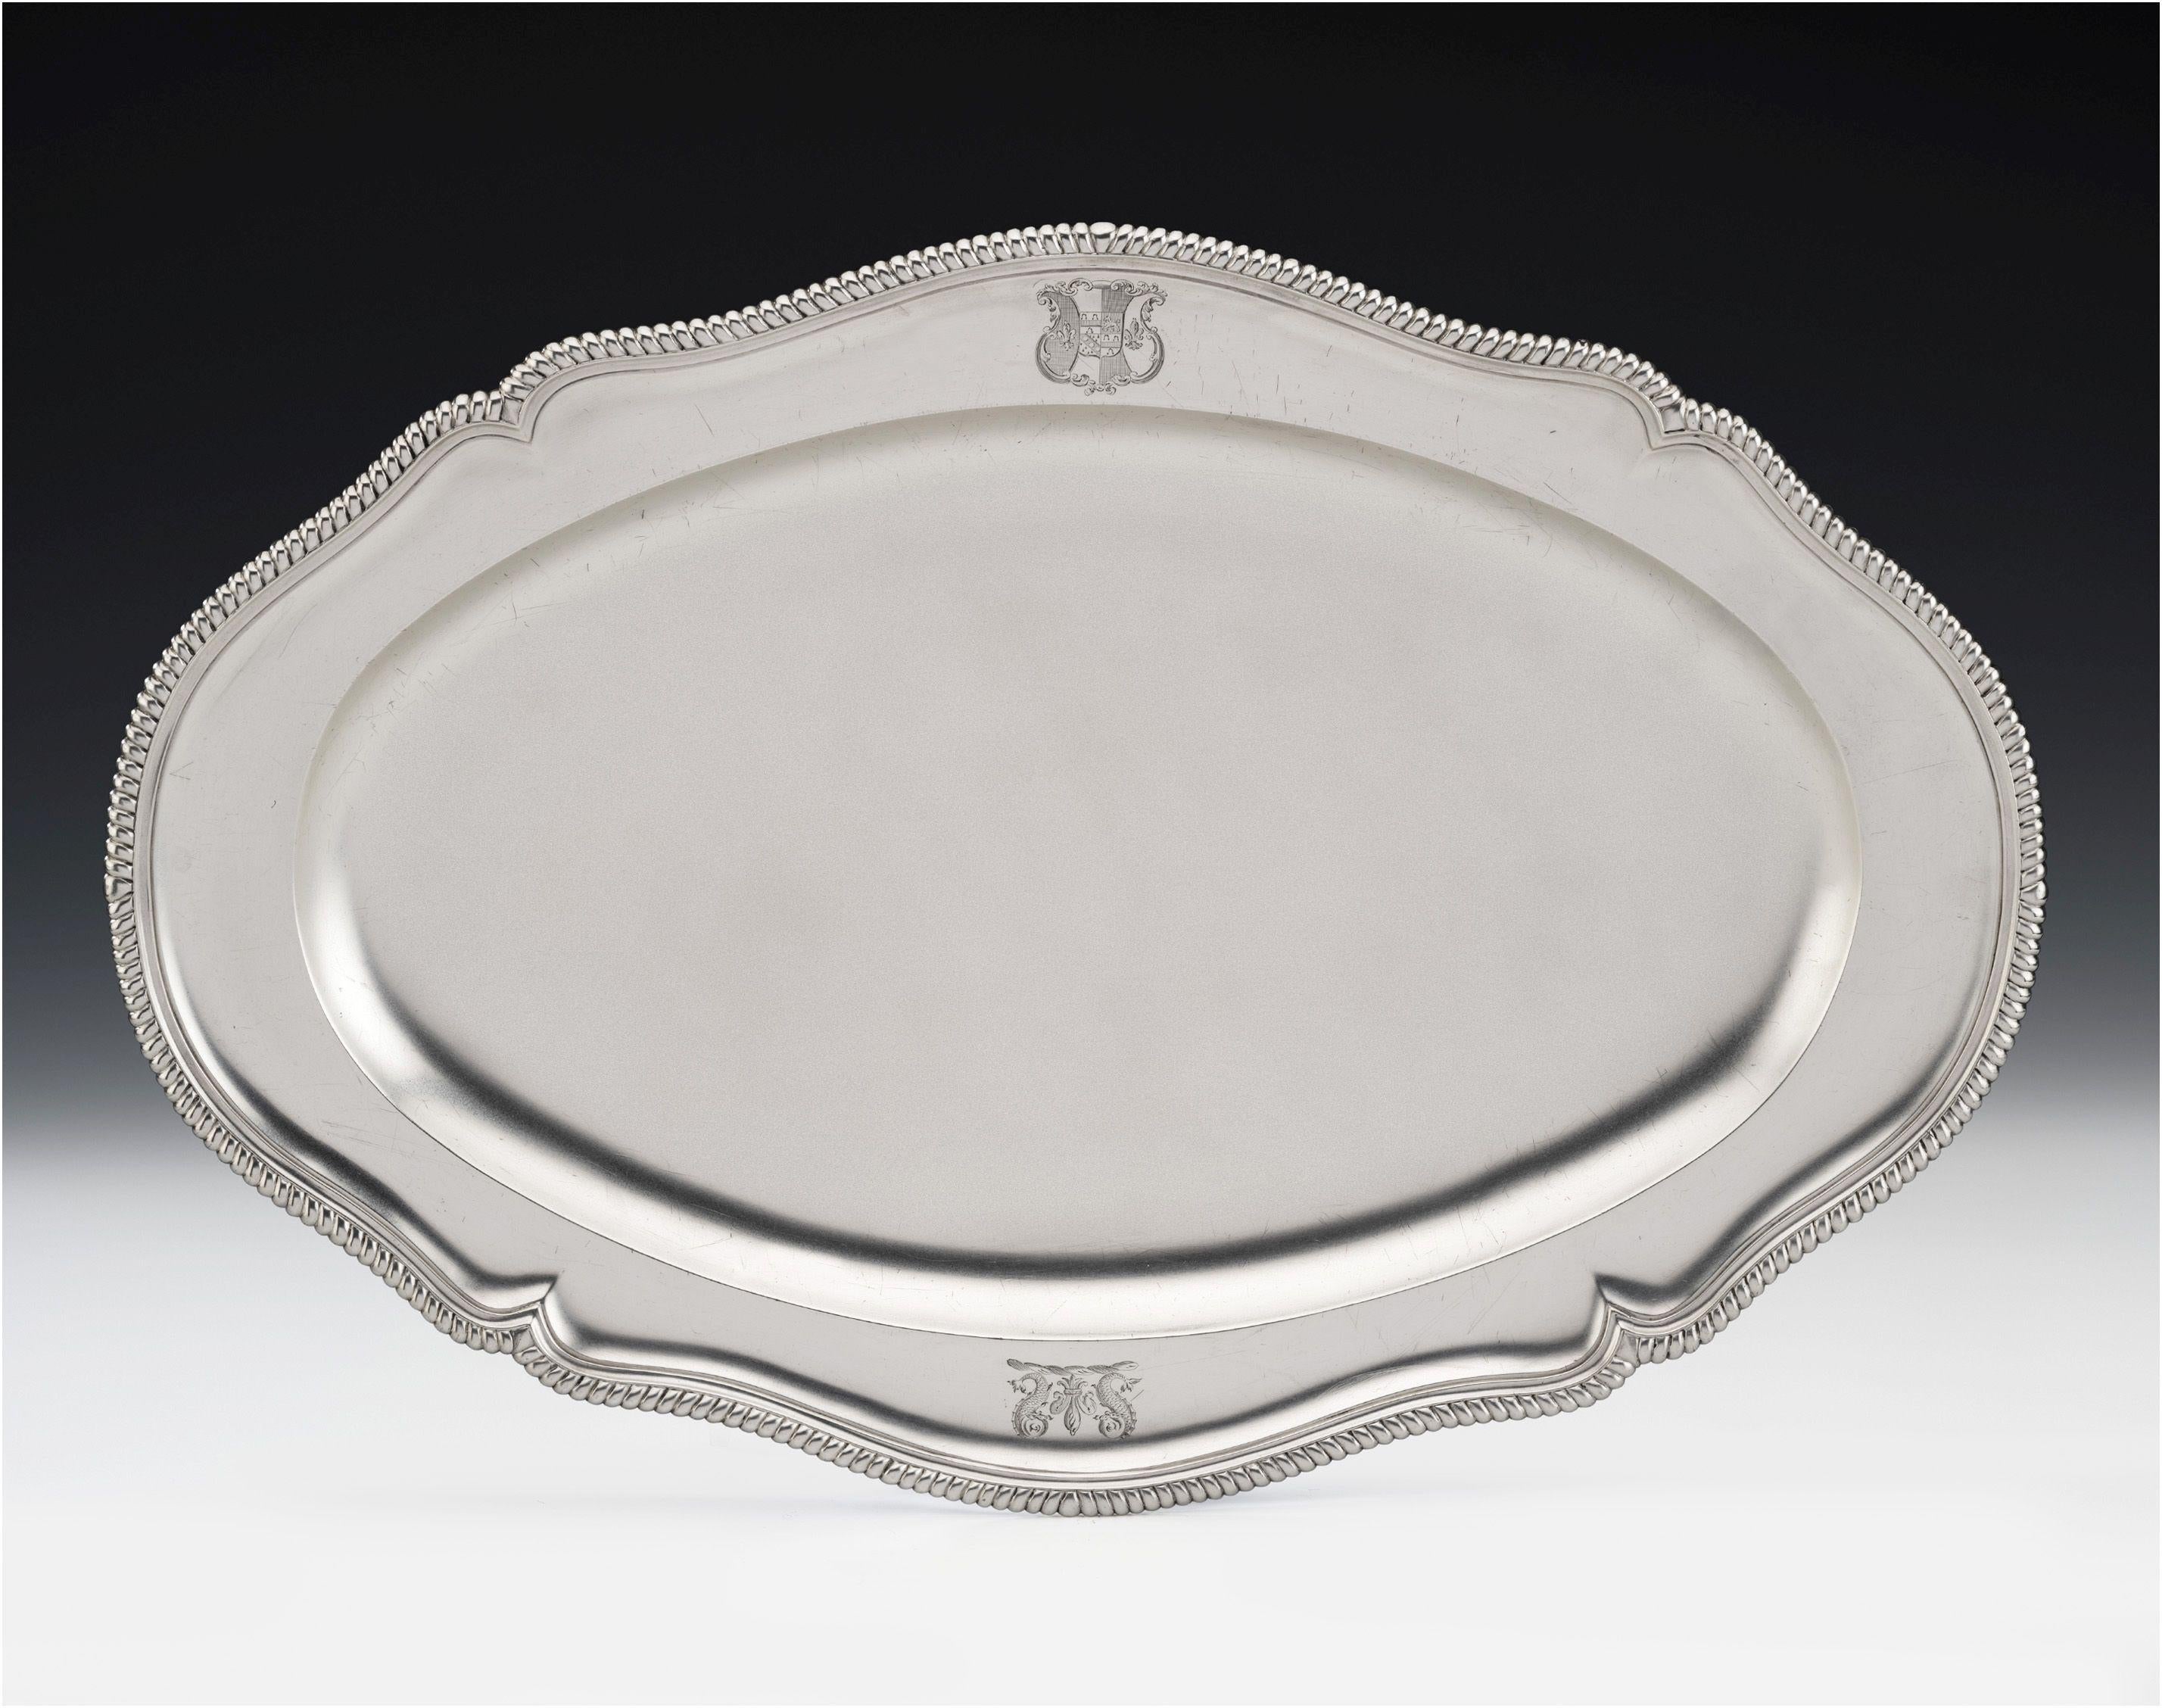 This exceptionally fine piece has an unusual elongated form, ideal for a salmon. The raised, shaped, border is decorated with unusual rounded gadrooning and the border is engraved on one side with a contemporary Armorial and on the other with an